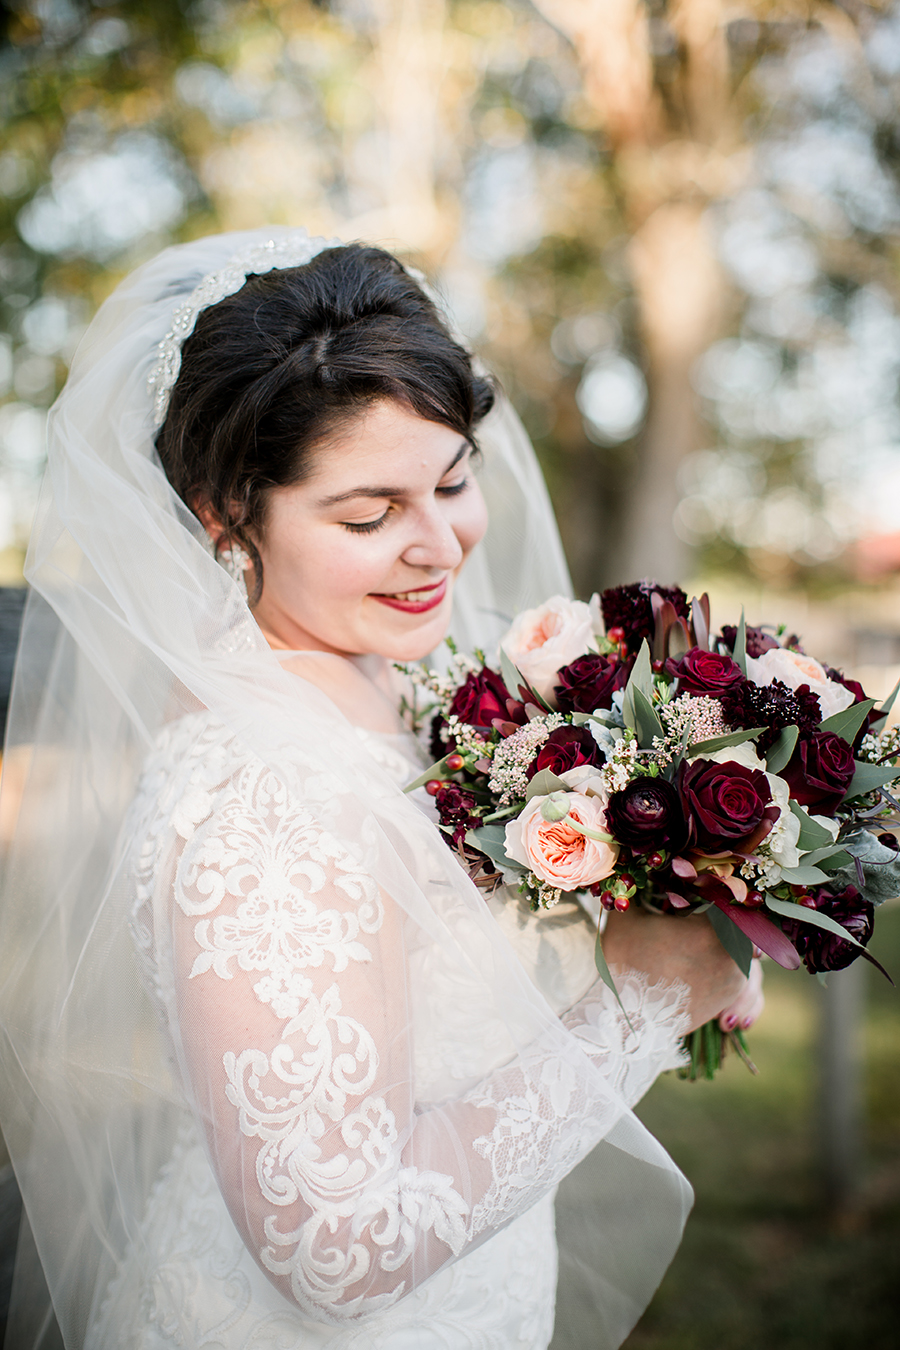 Flowers close to her face at this bridal session at The Barn at High Point Farms by Knoxville Wedding Photographer, Amanda May Photos.